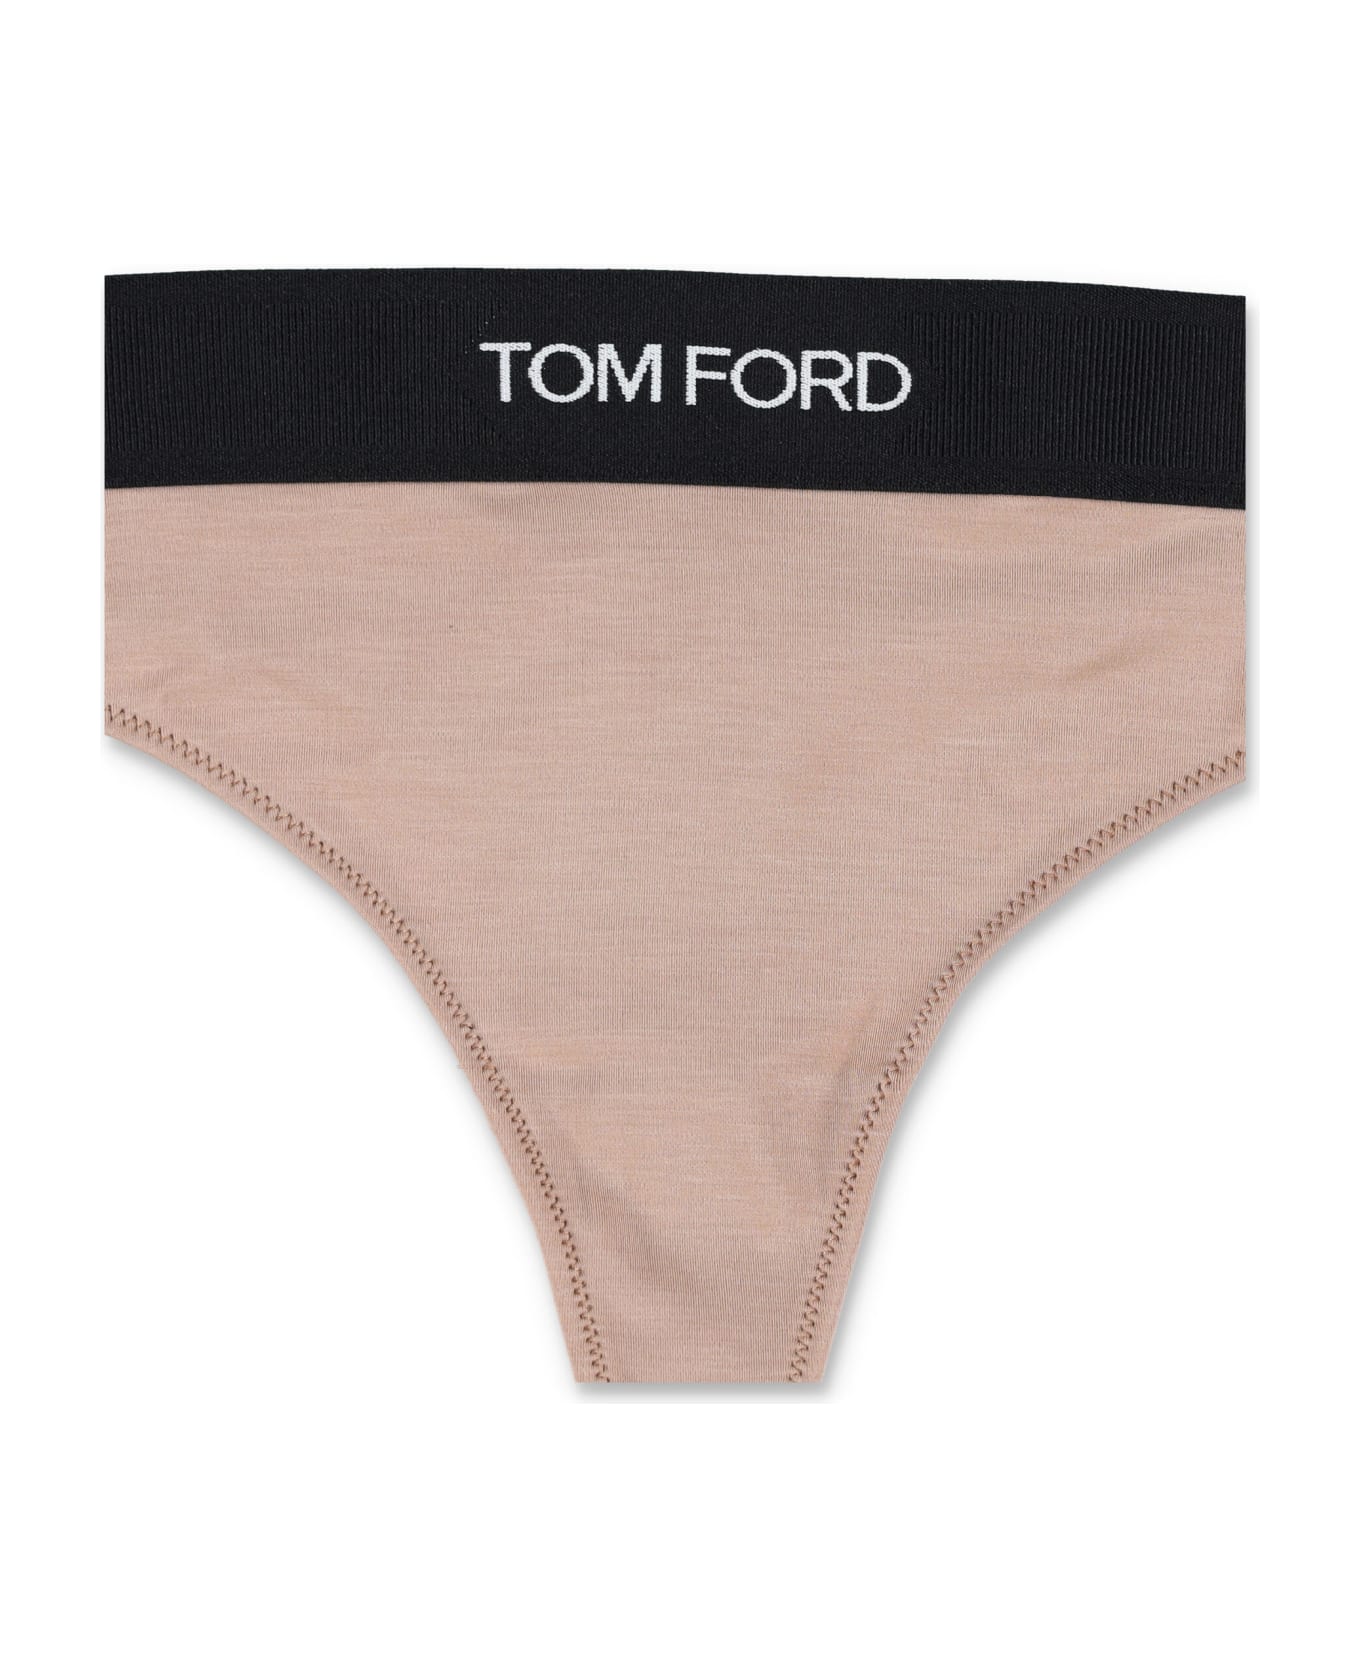 Tom Ford Brief With Logo - DUSTY ROSE